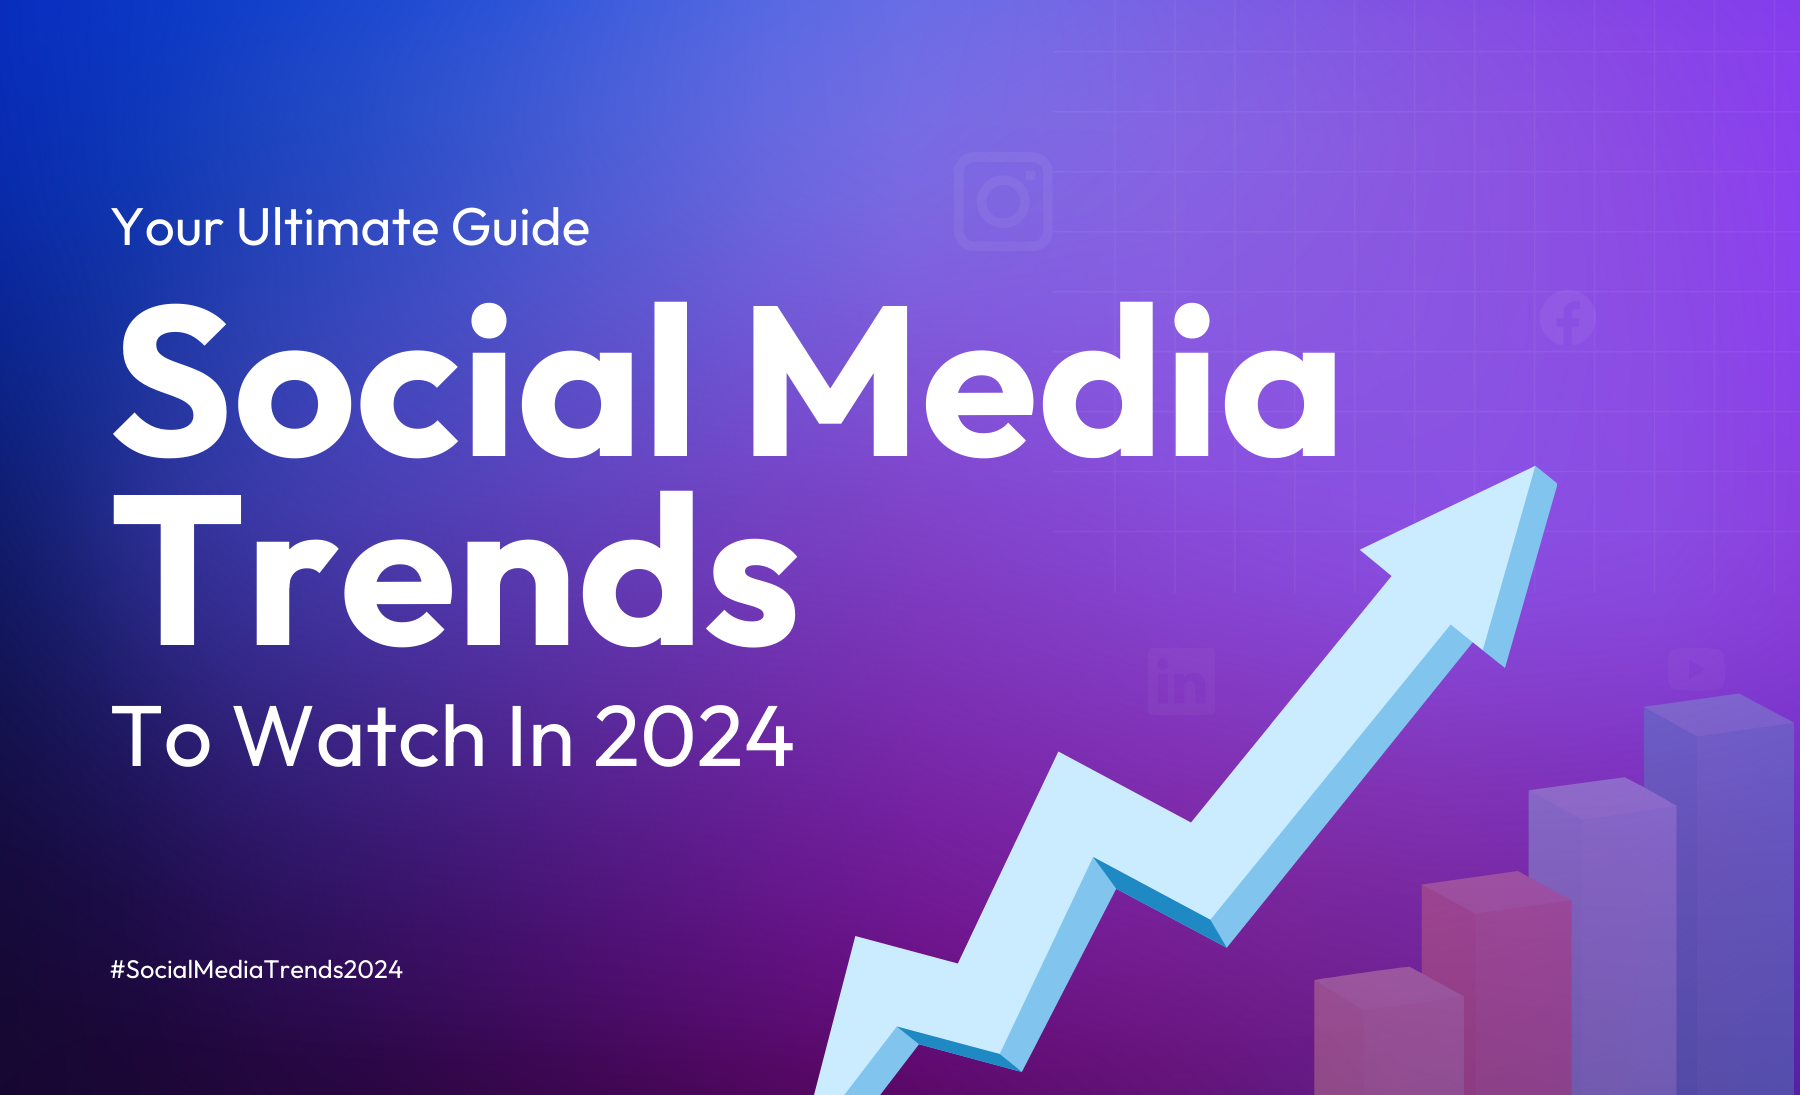 Your Ultimate Guide To The Biggest Social Media Trends To Watch In 2024